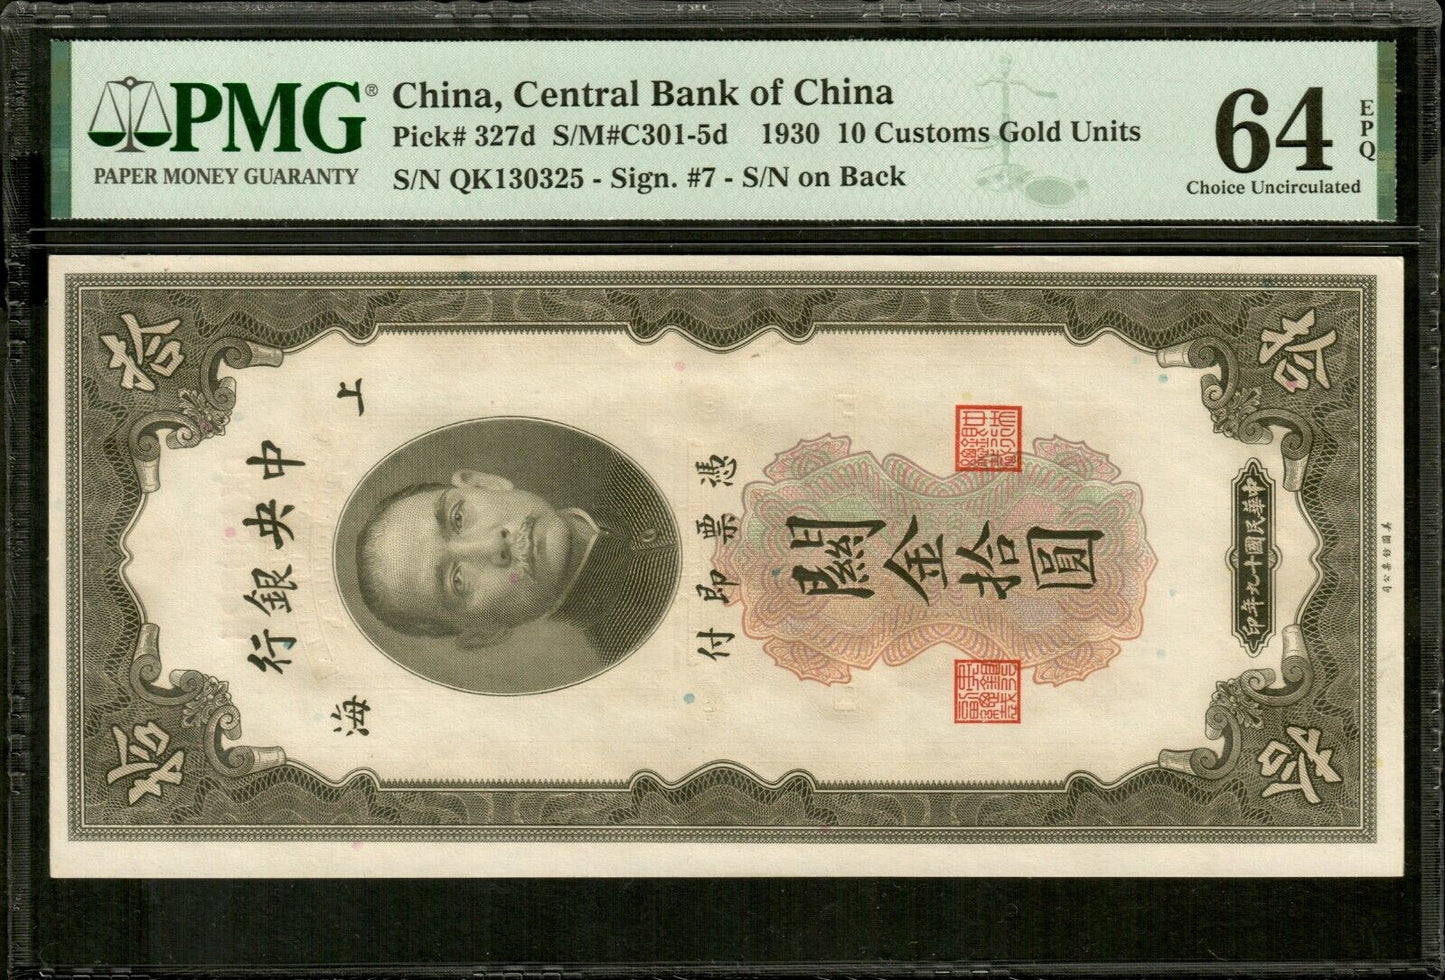 CHINE Central Bank of China, 10 Customs Gold Units 1930 P.327d PMG Ch Unc 64 EPQ